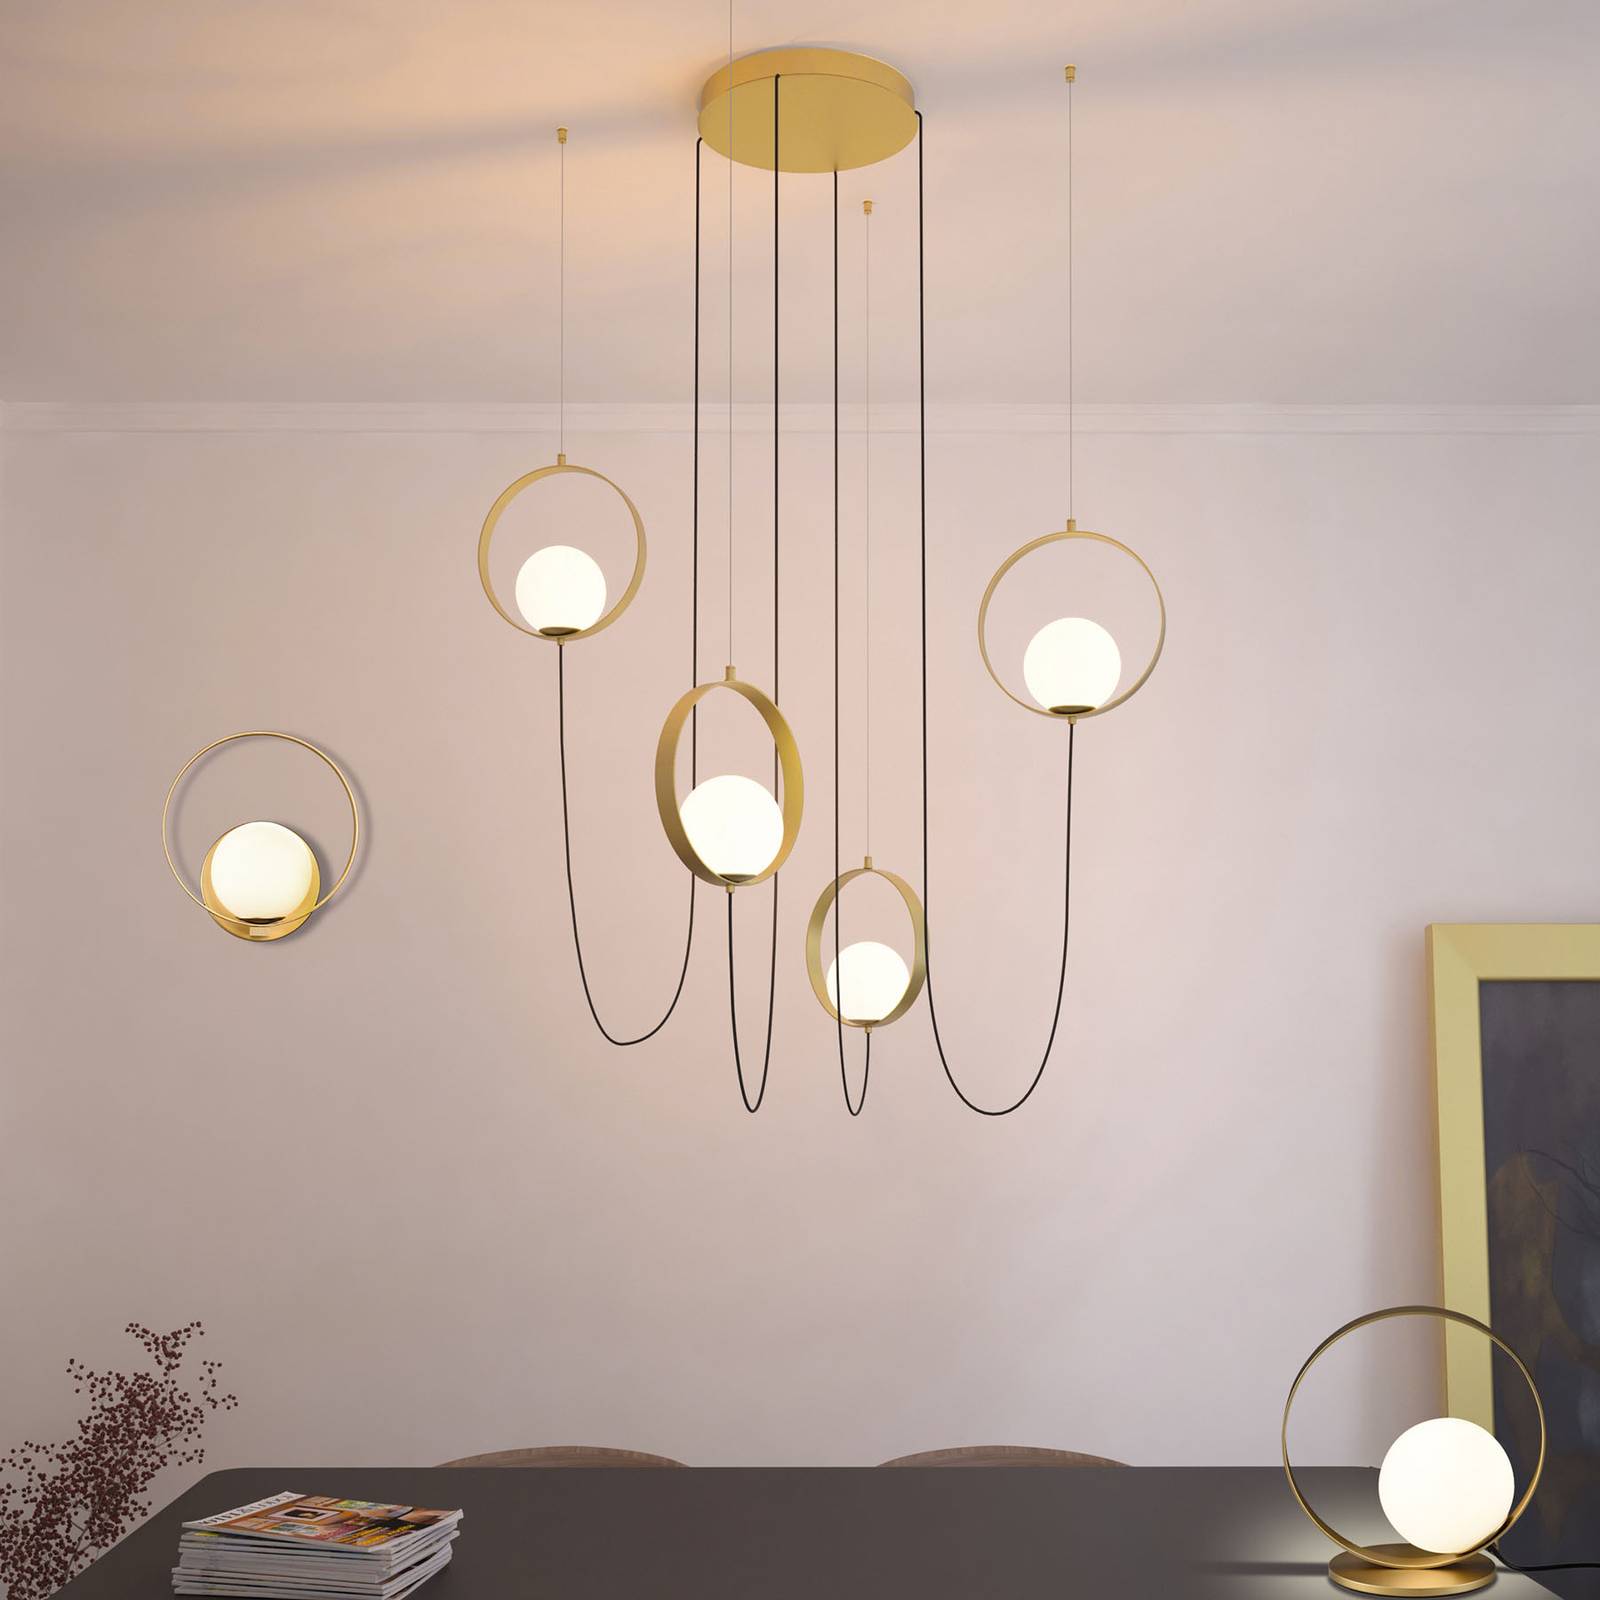 LED hanglamp Halo, 4-lamps, decentraal